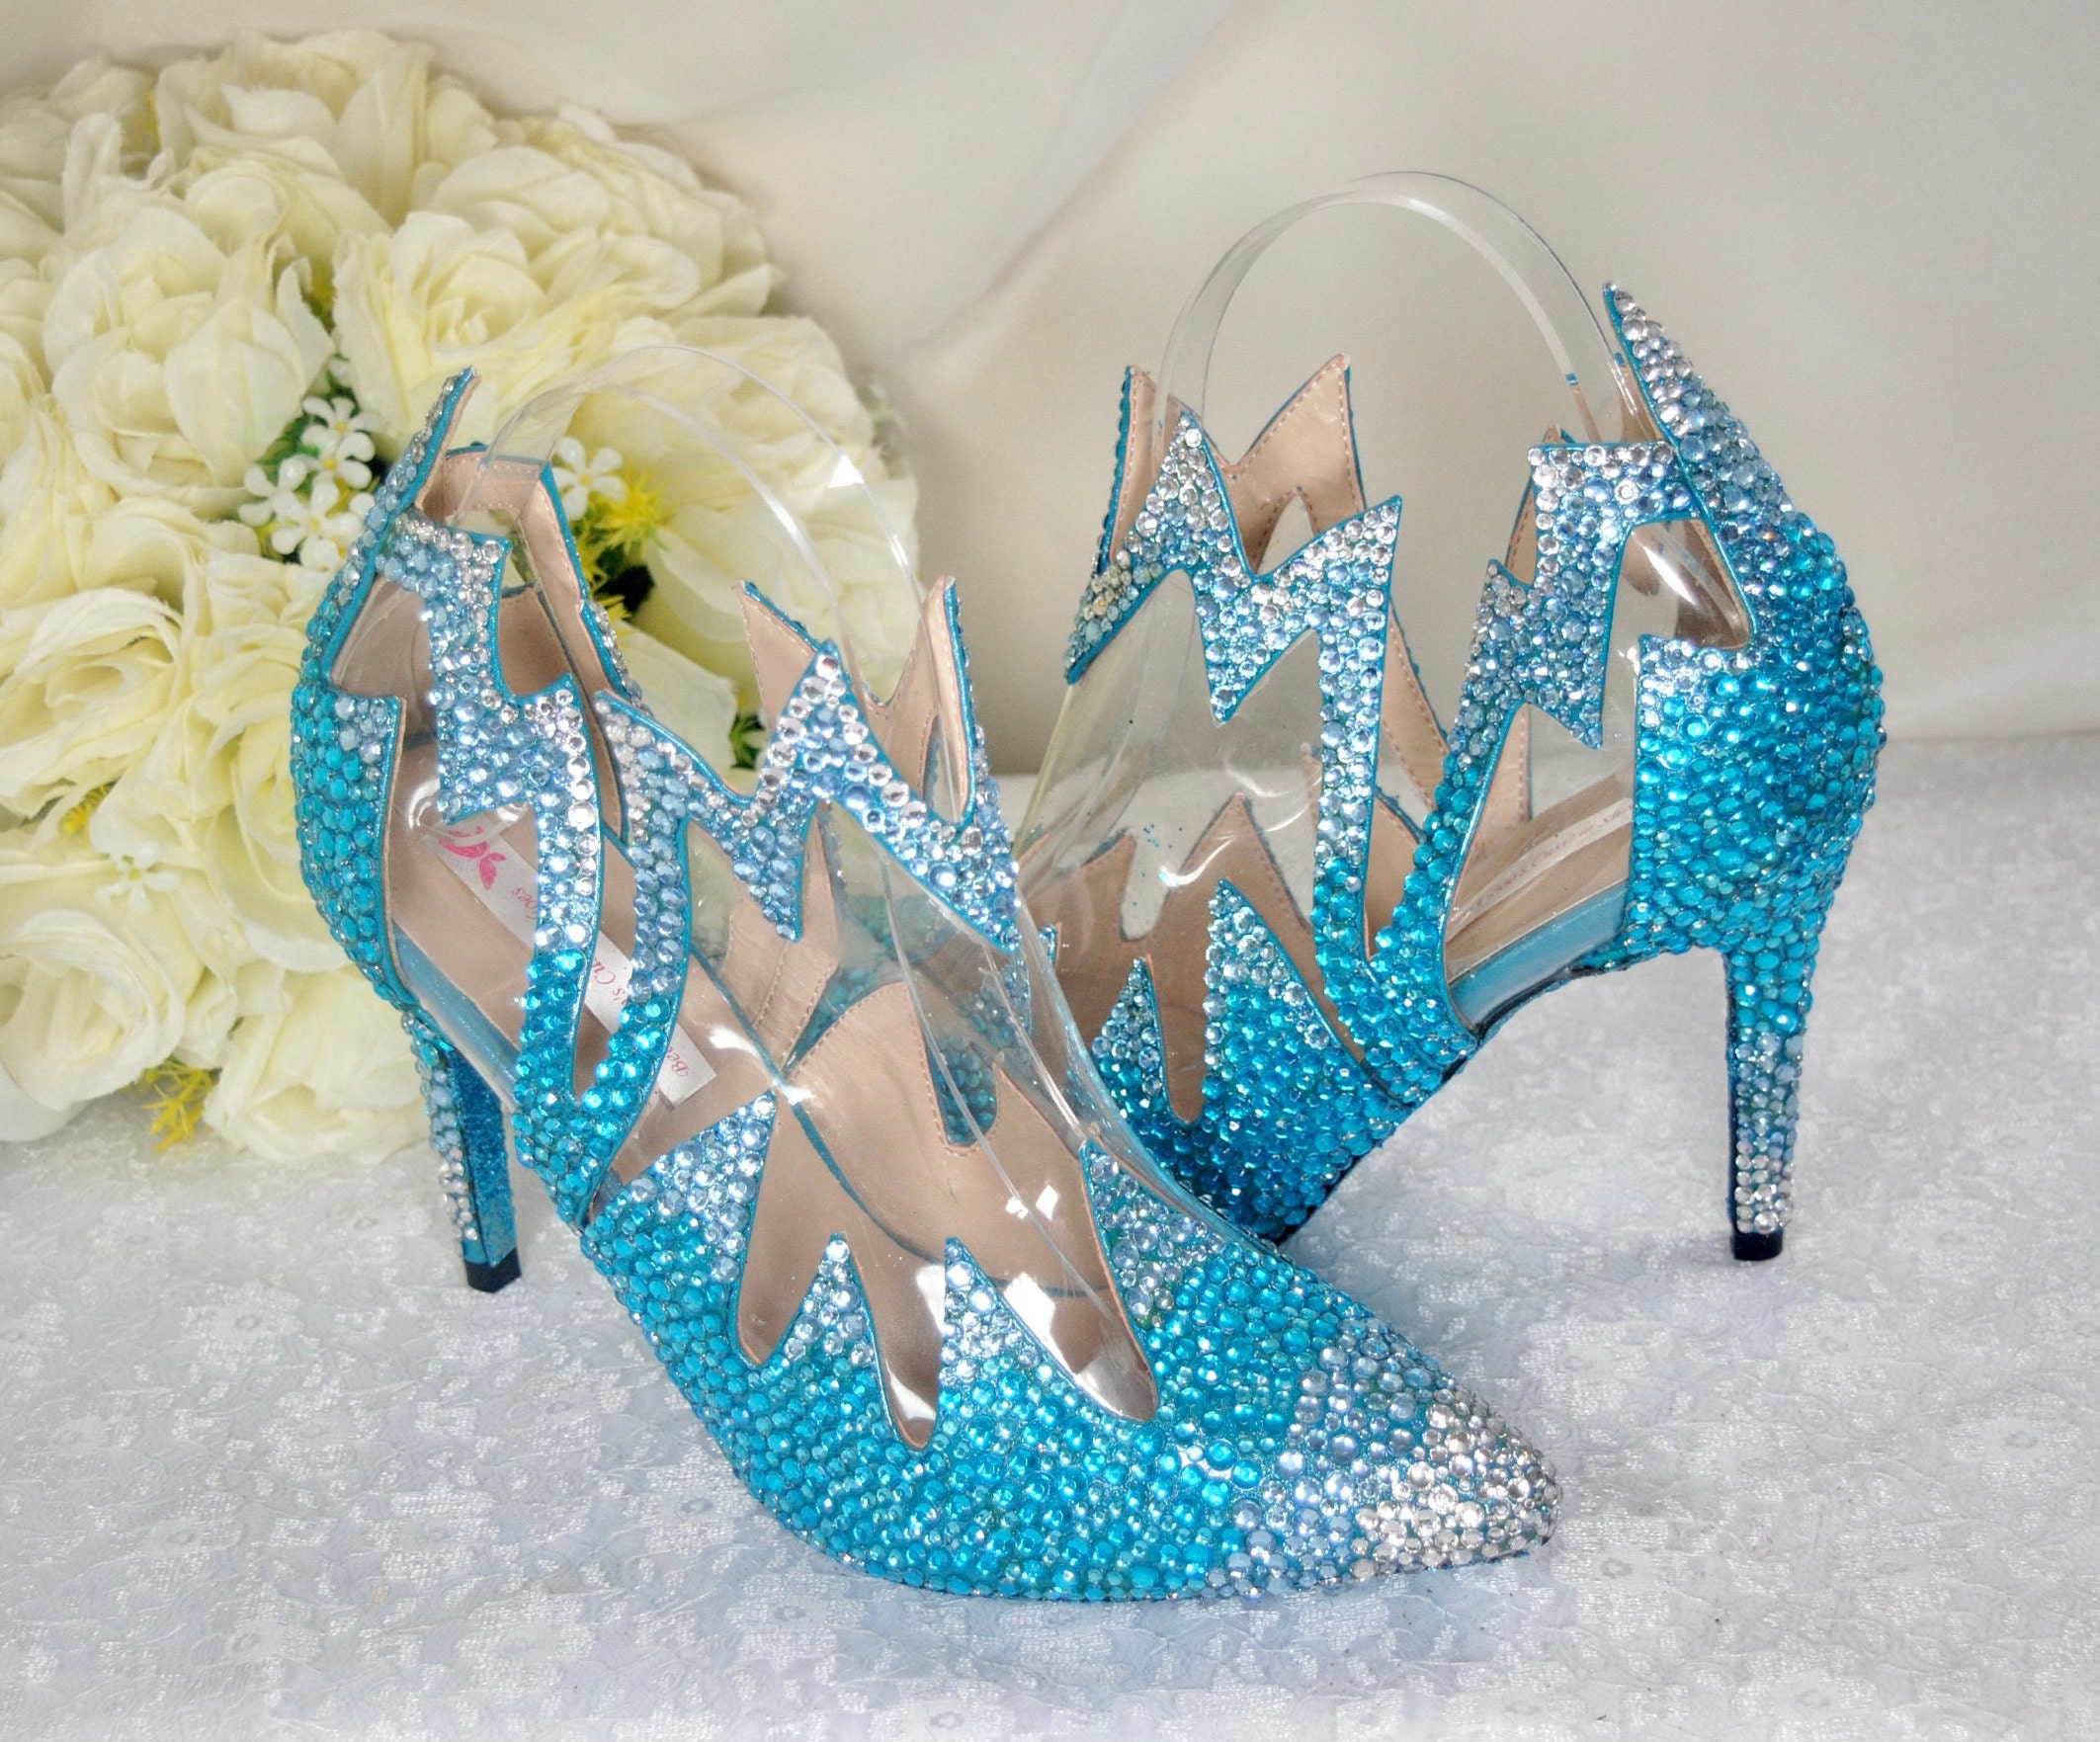 Bling Wedding Shoes, Ivory Satin and Lace Bridal Shoes With Rhinestones 